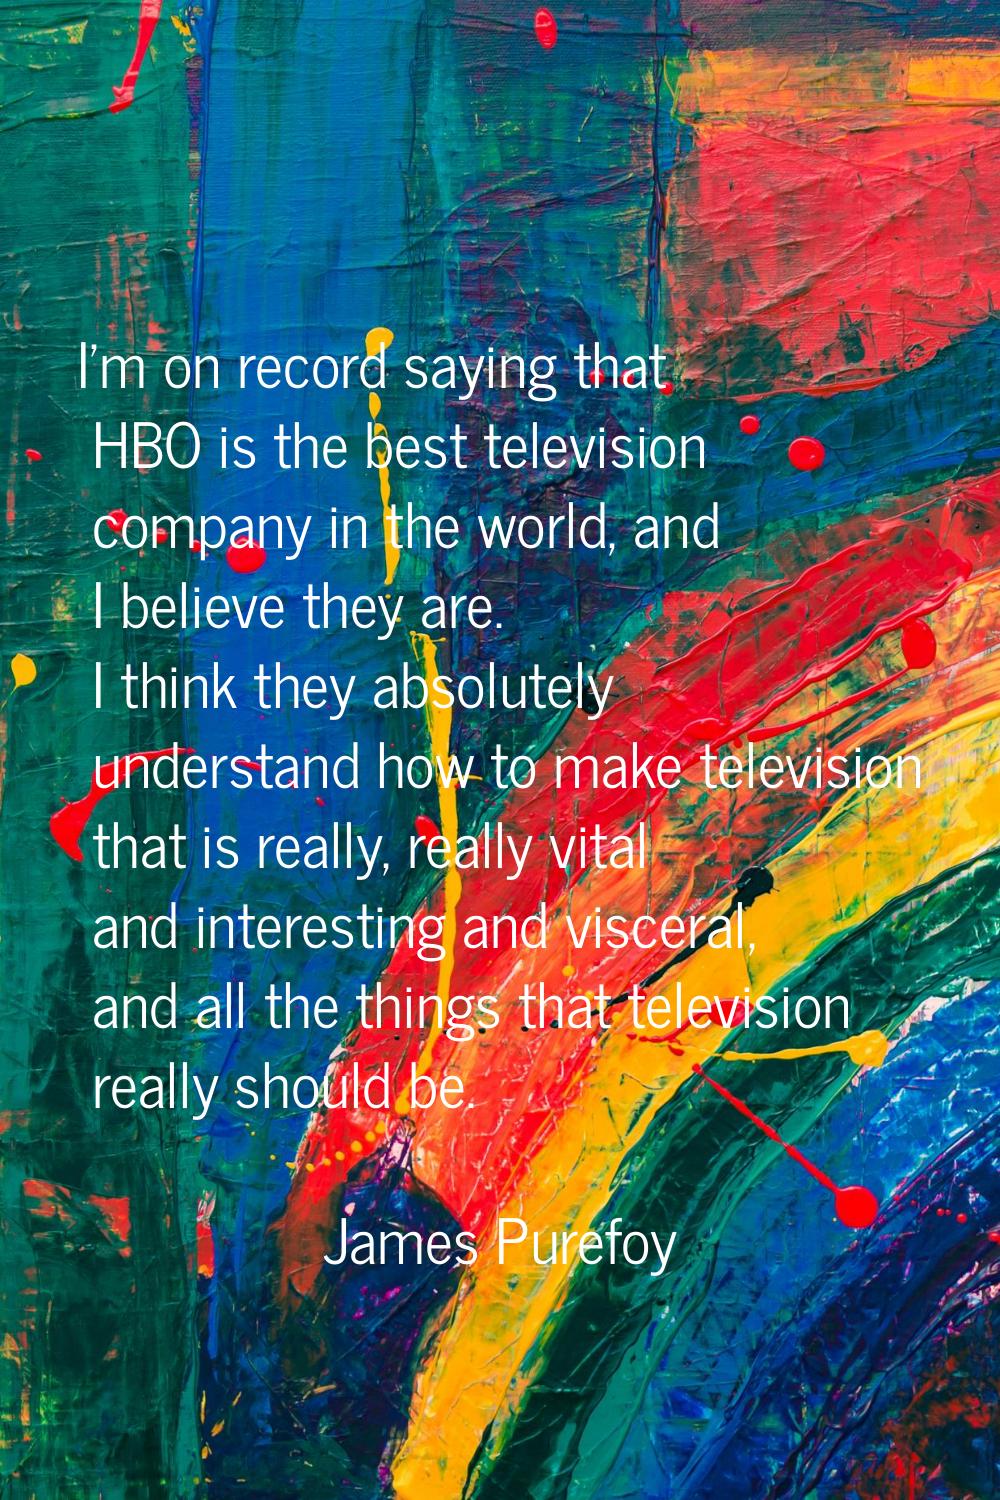 I'm on record saying that HBO is the best television company in the world, and I believe they are. 